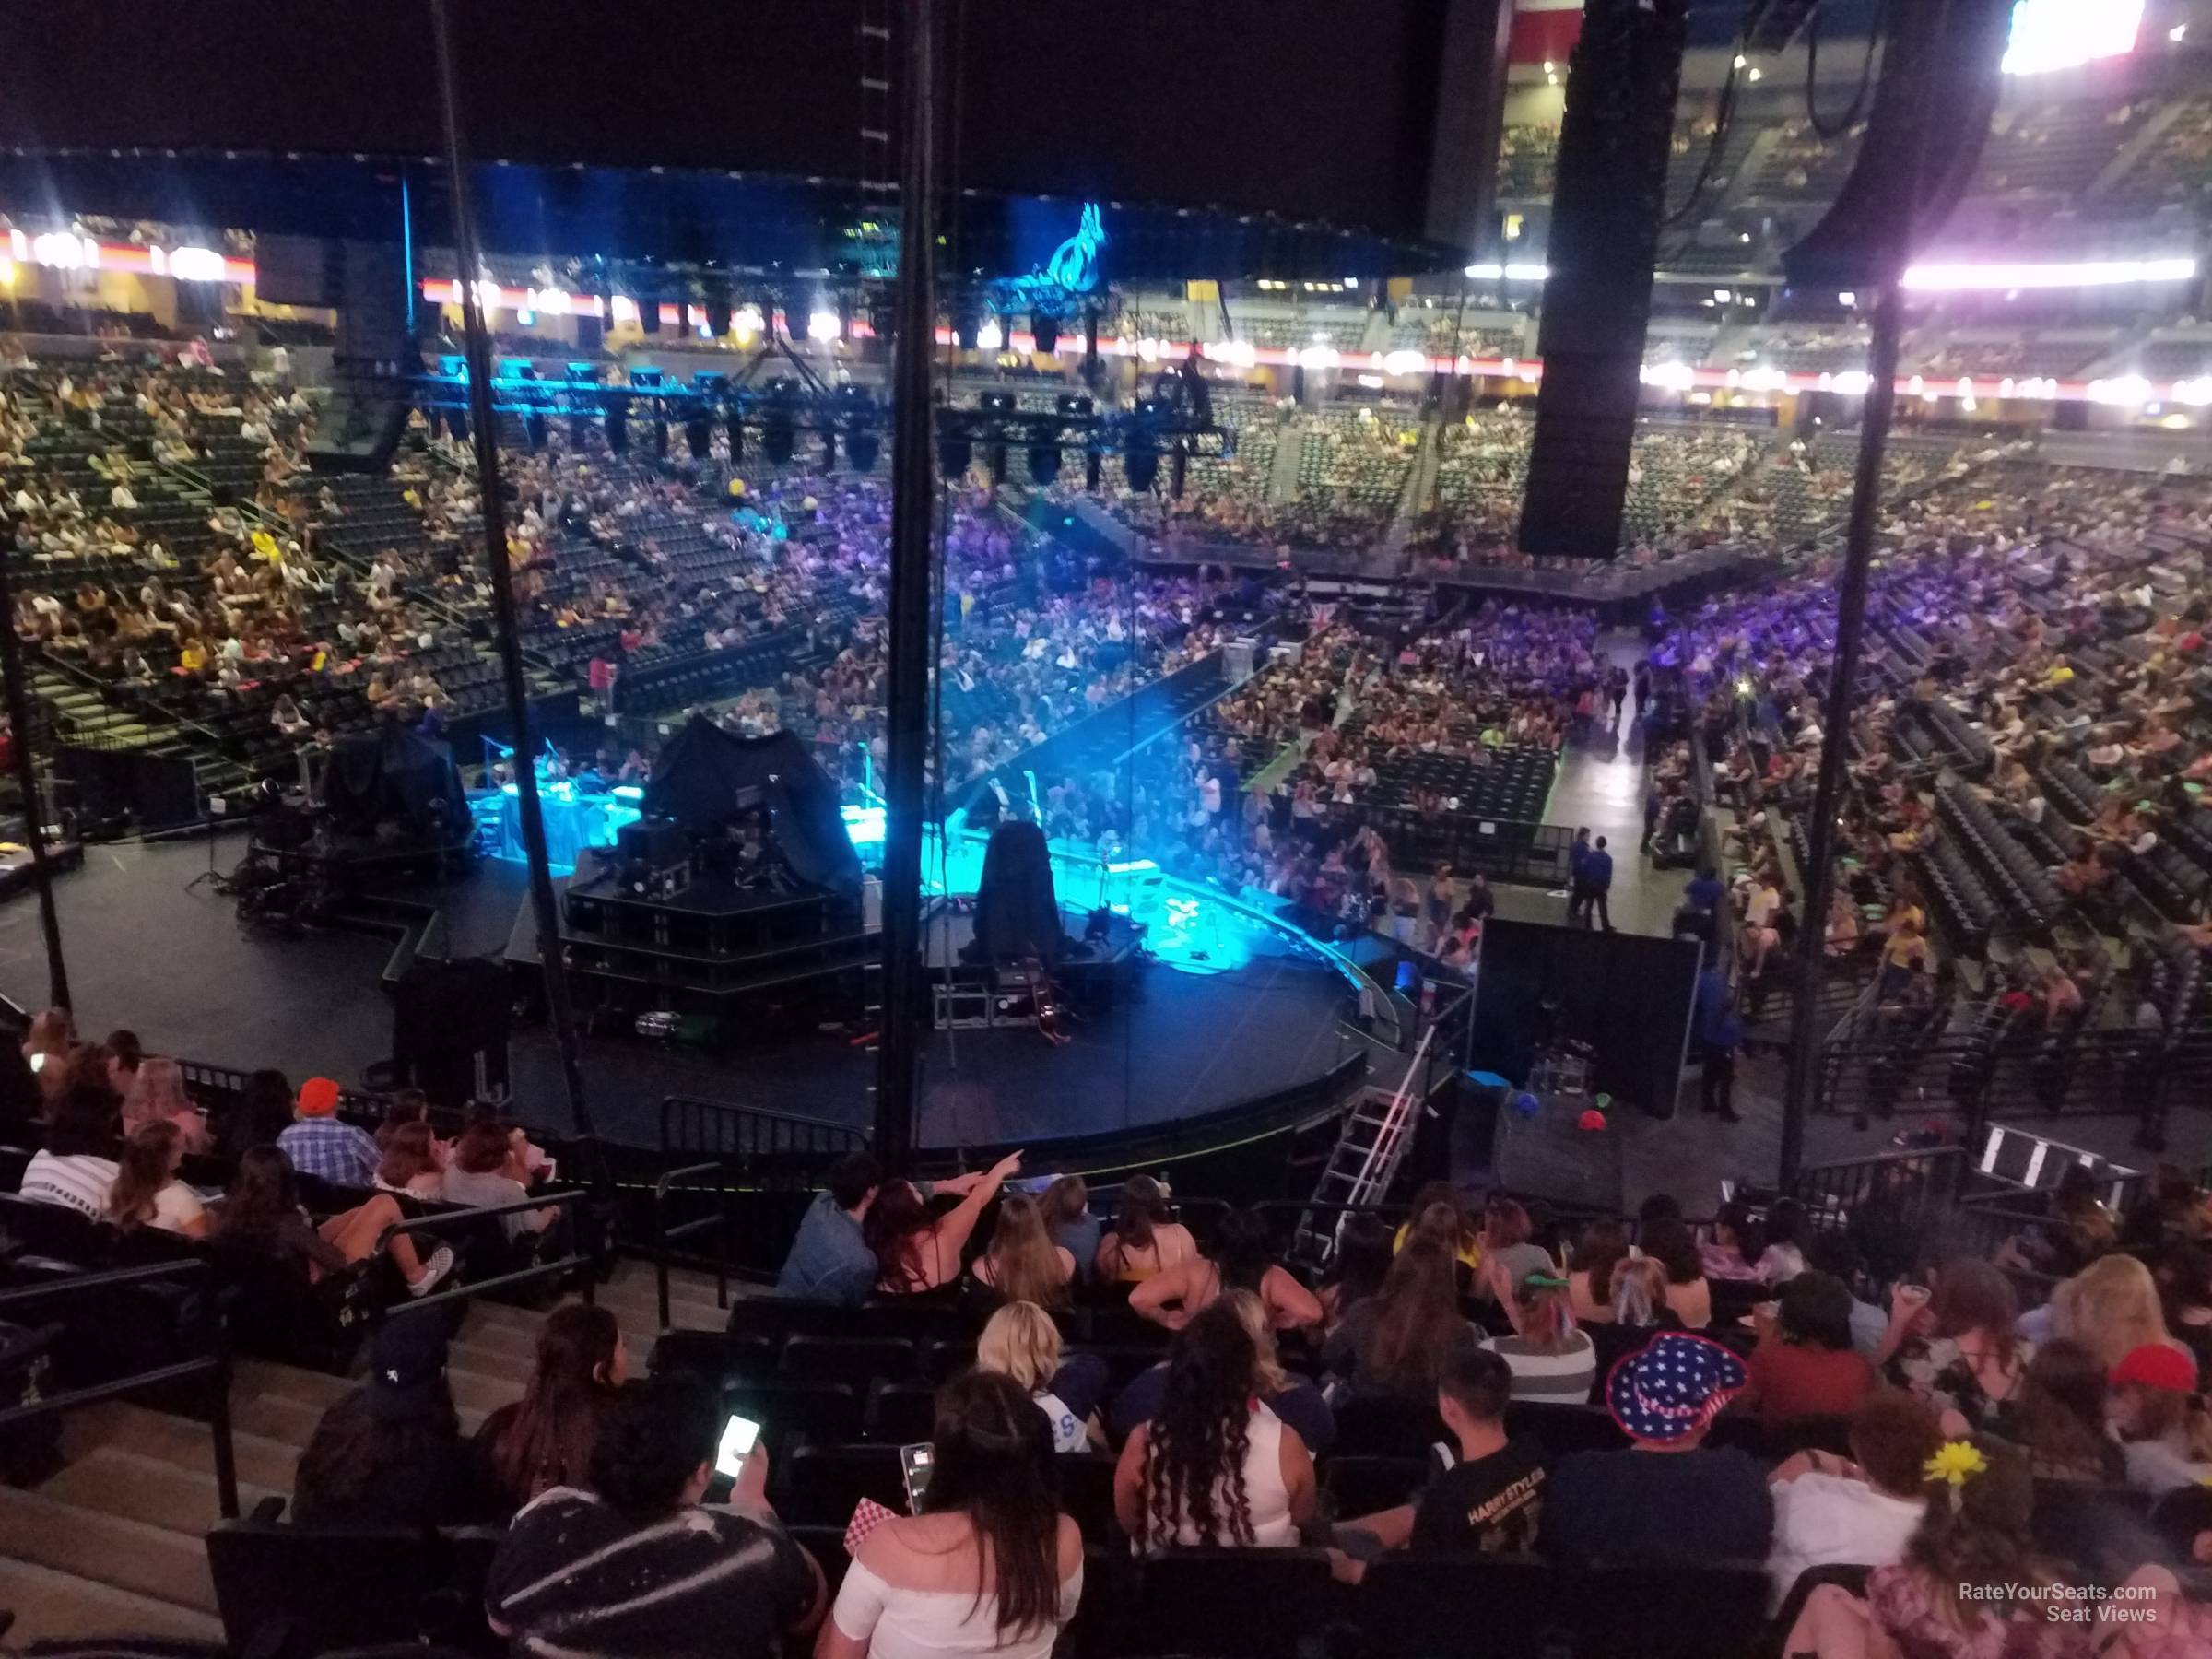 section 134, row 19 seat view  for concert - ball arena